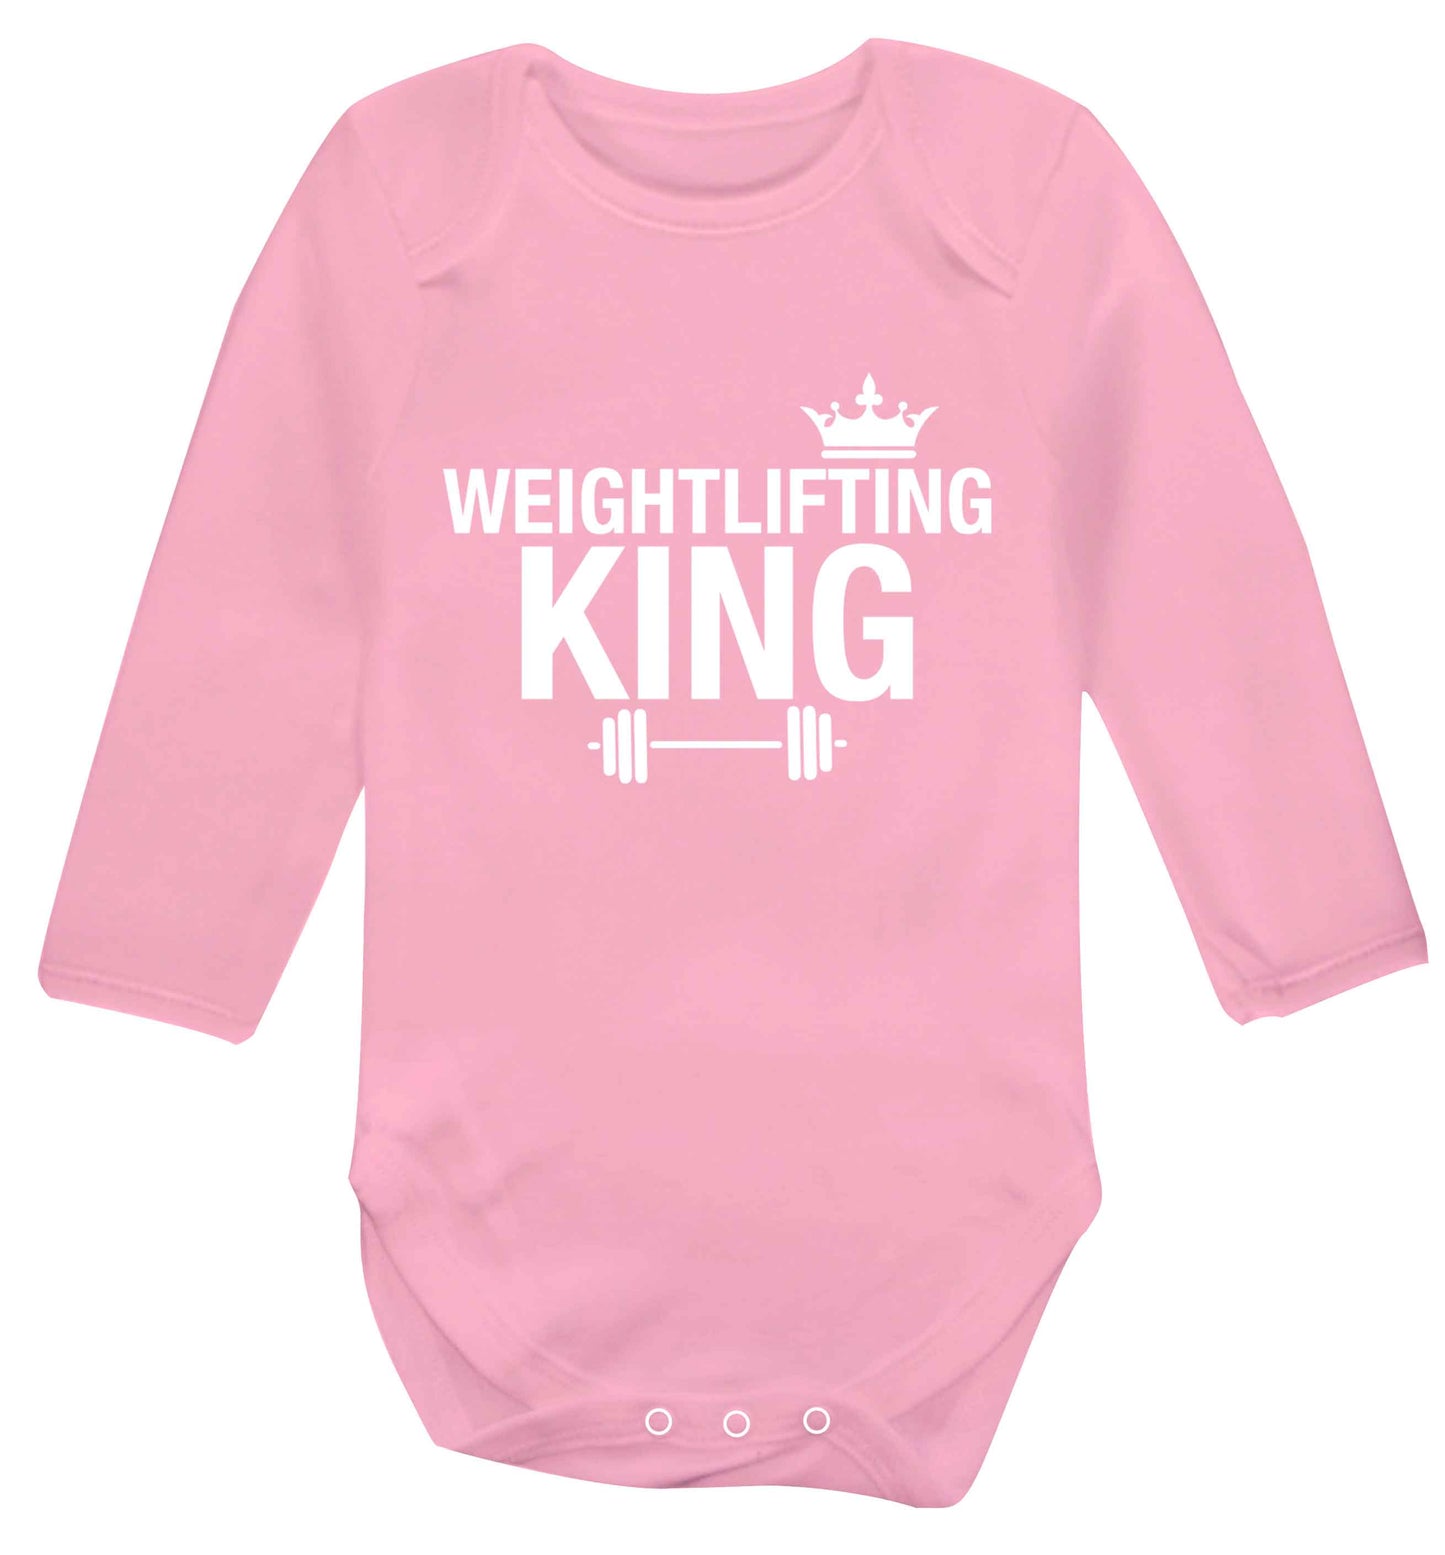 Weightlifting king Baby Vest long sleeved pale pink 6-12 months